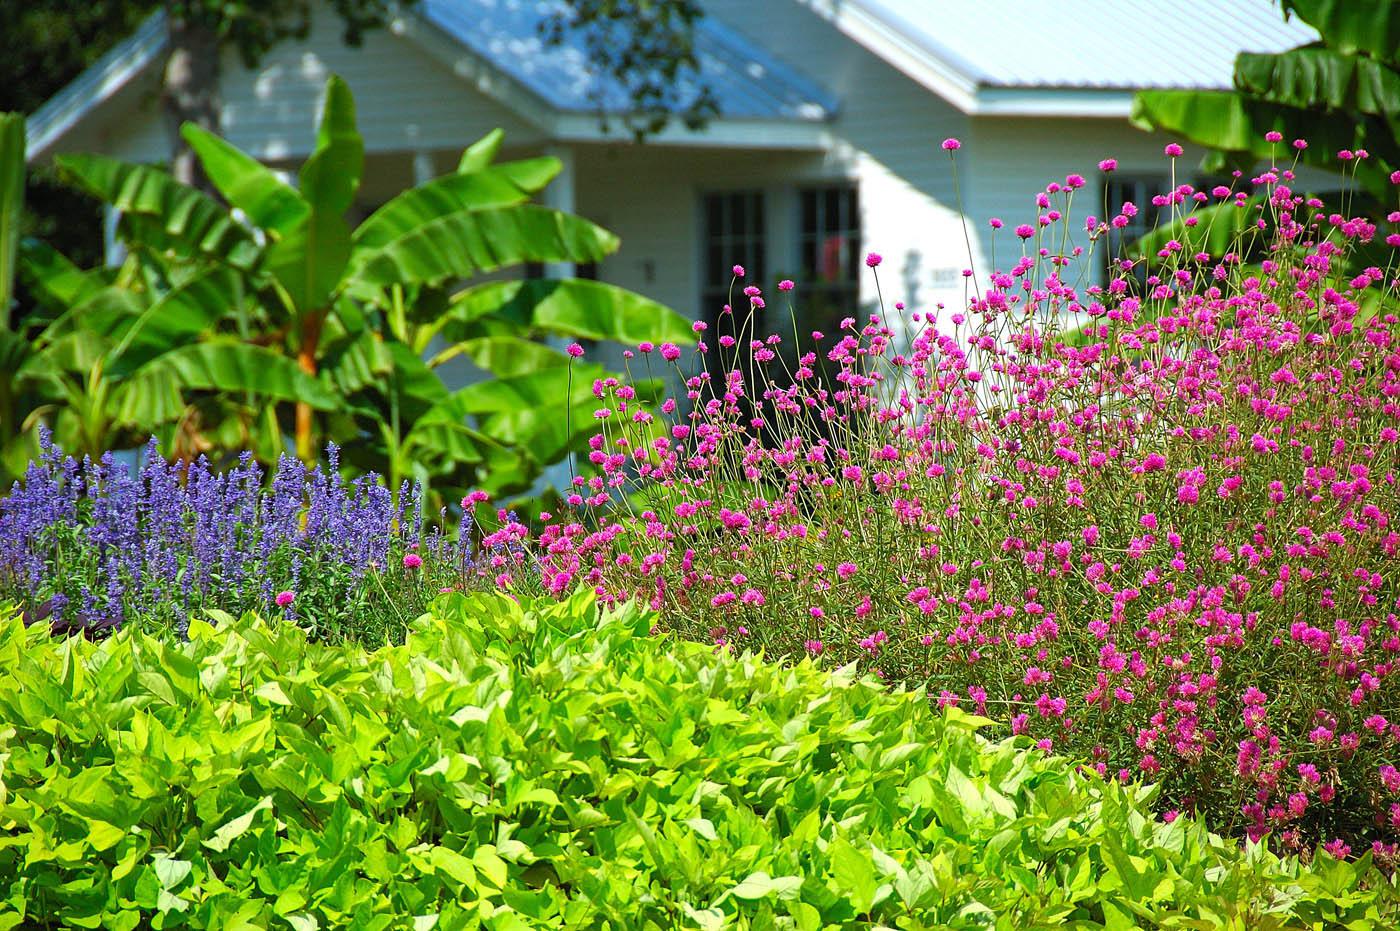 Fireworks gomphrena is tall and works well toward the back of the border. Here, it is complemented by the spiky blue blooms of Velocity salvia and the lime green leaves of ornamental sweet potato. (Photo by Norman Winter)